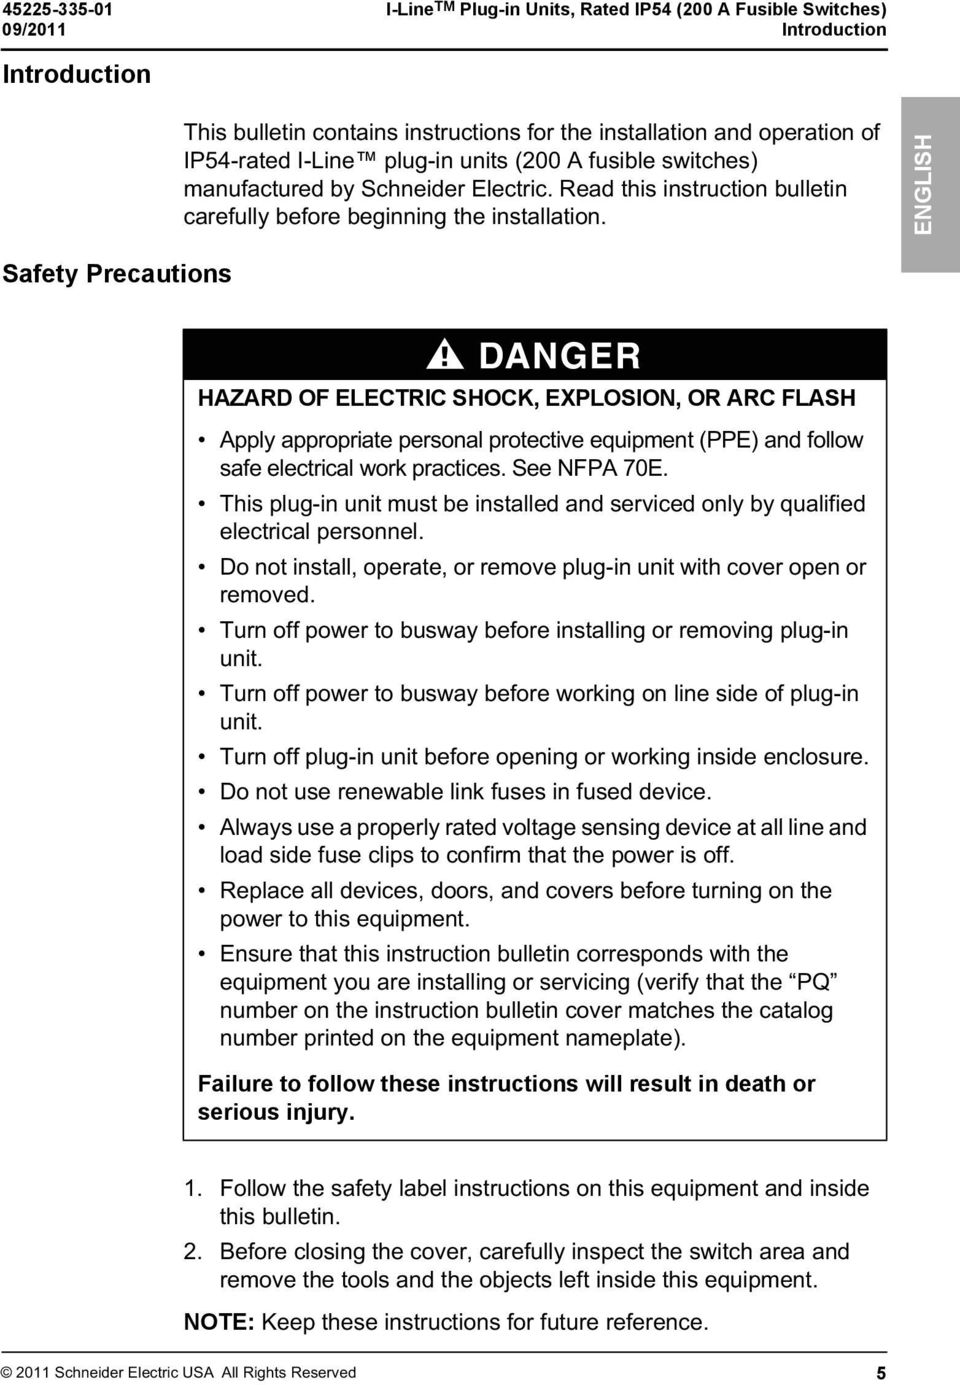 ENGLISH Safety Precautions DANGER HAZARD OF ELECTRIC SHOCK, EXPLOSION, OR ARC FLASH Apply appropriate personal protective equipment (PPE) and follow safe electrical work practices. See NFPA 70E.